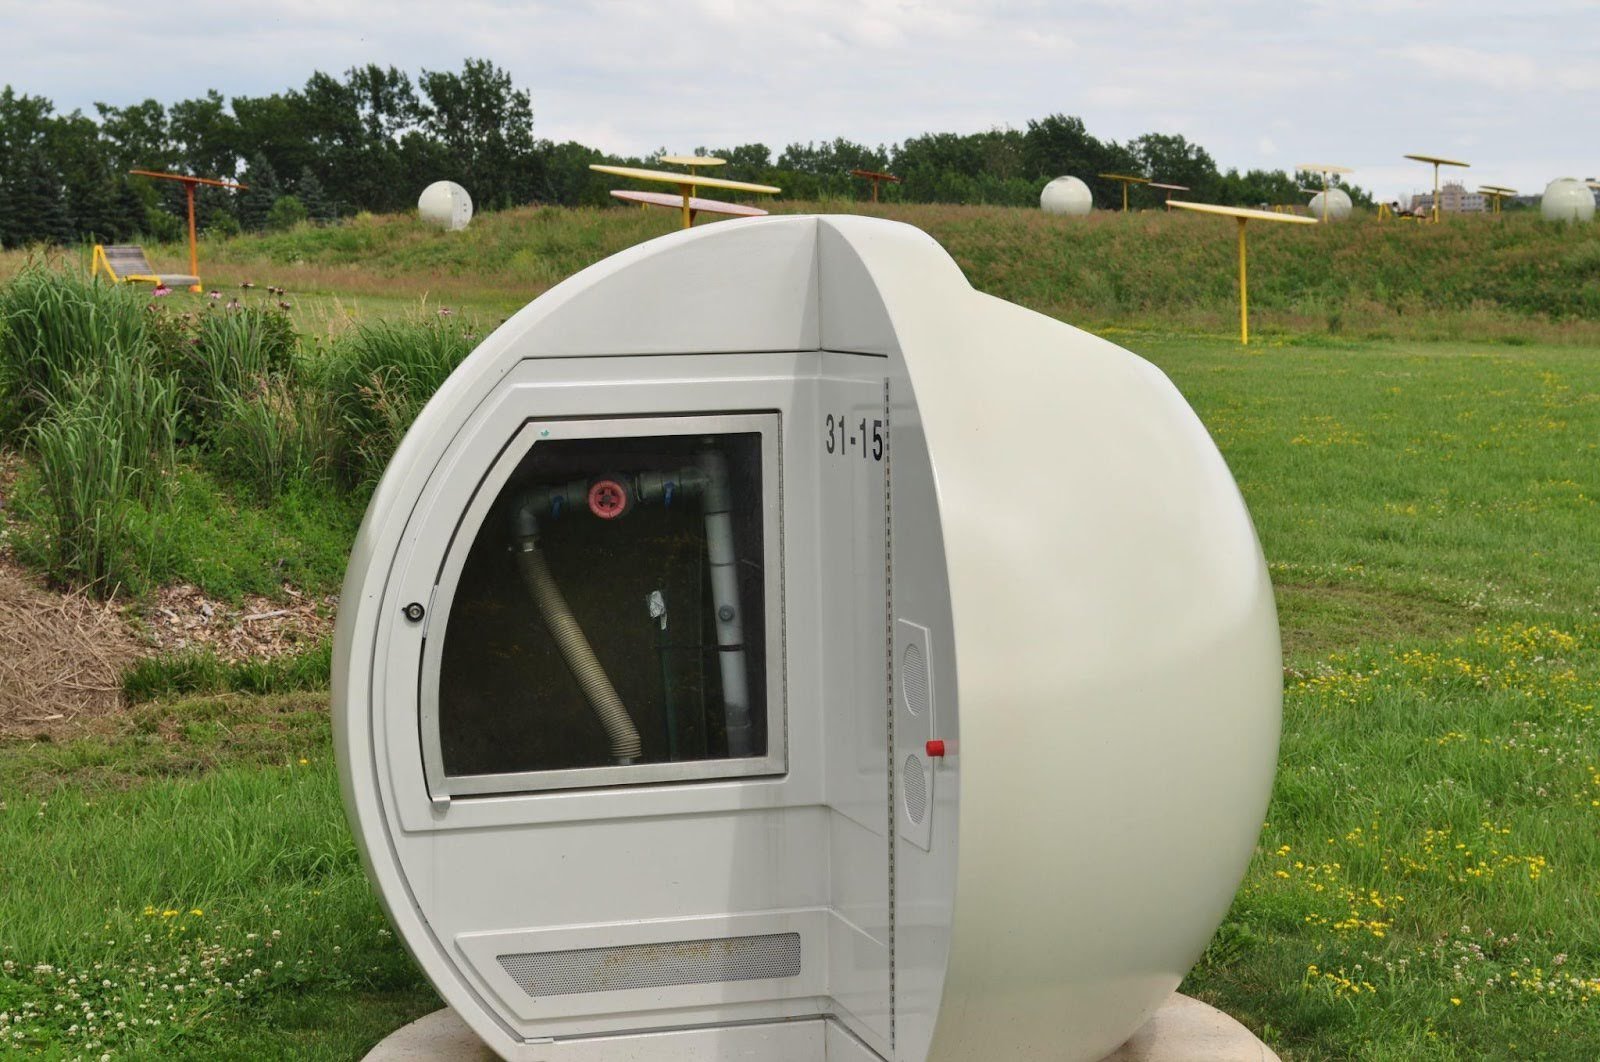 Round pod to capture methane from decomposing grabage (Copy)